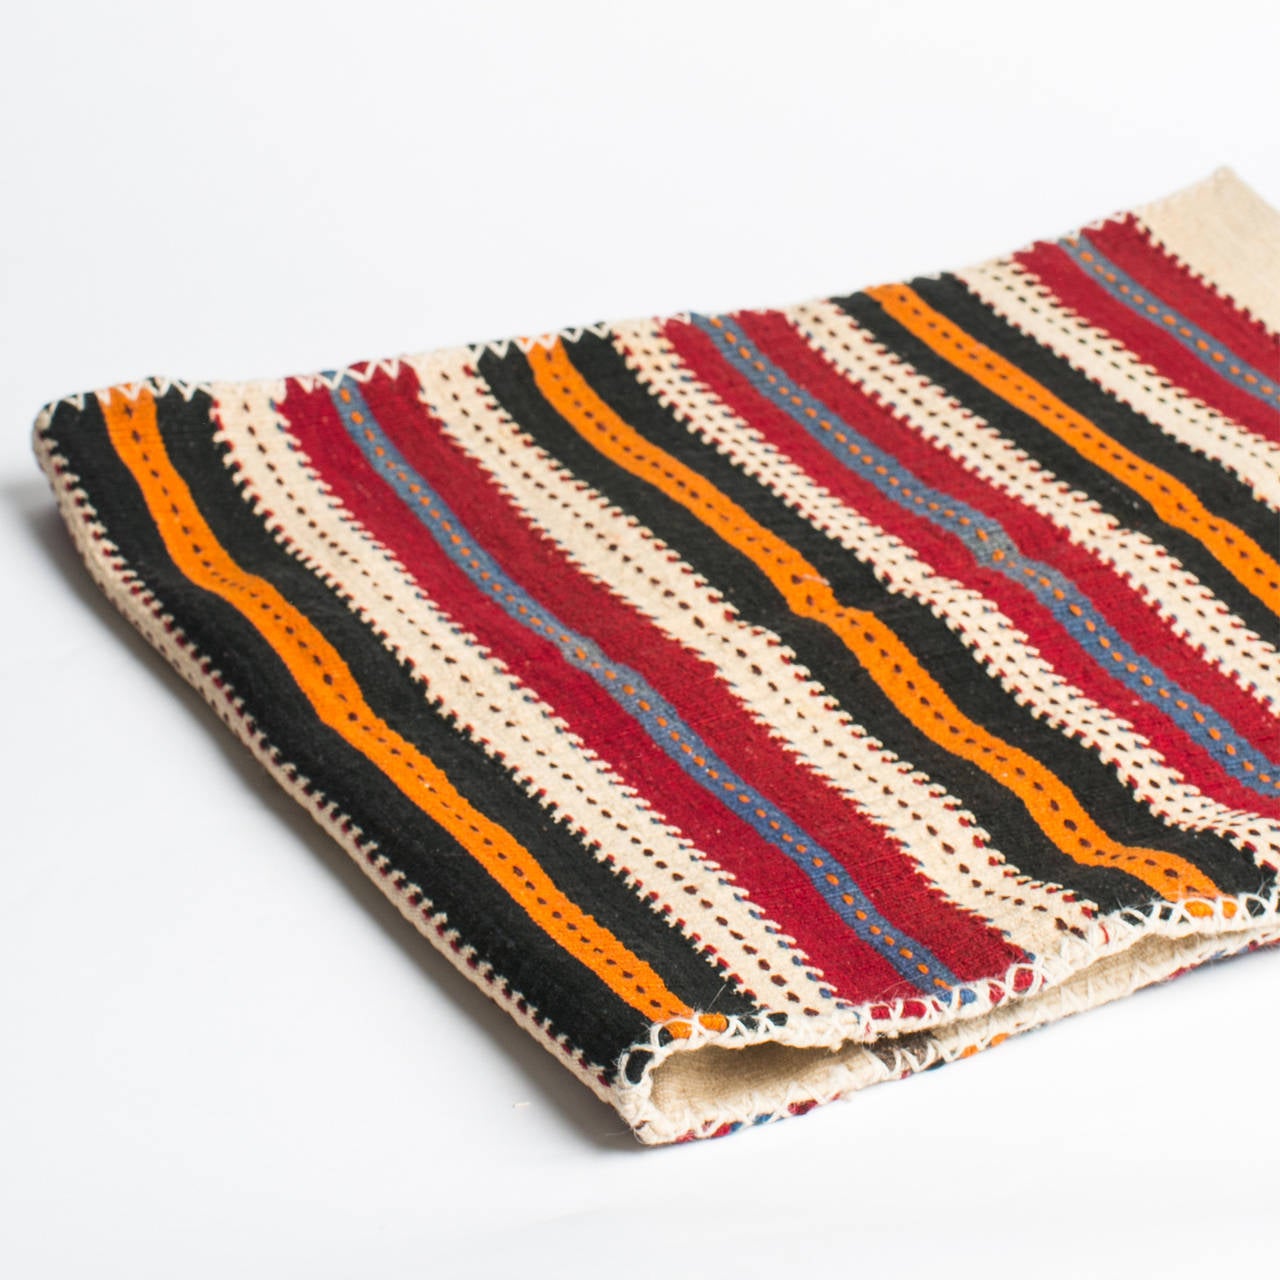 This two-sided tribal piece from Southeastern Turkey is flat woven with a striped on the front, with a more simplified natural color and traditional woven patterns on the back. It was originally used to transport and store grains and help preserve